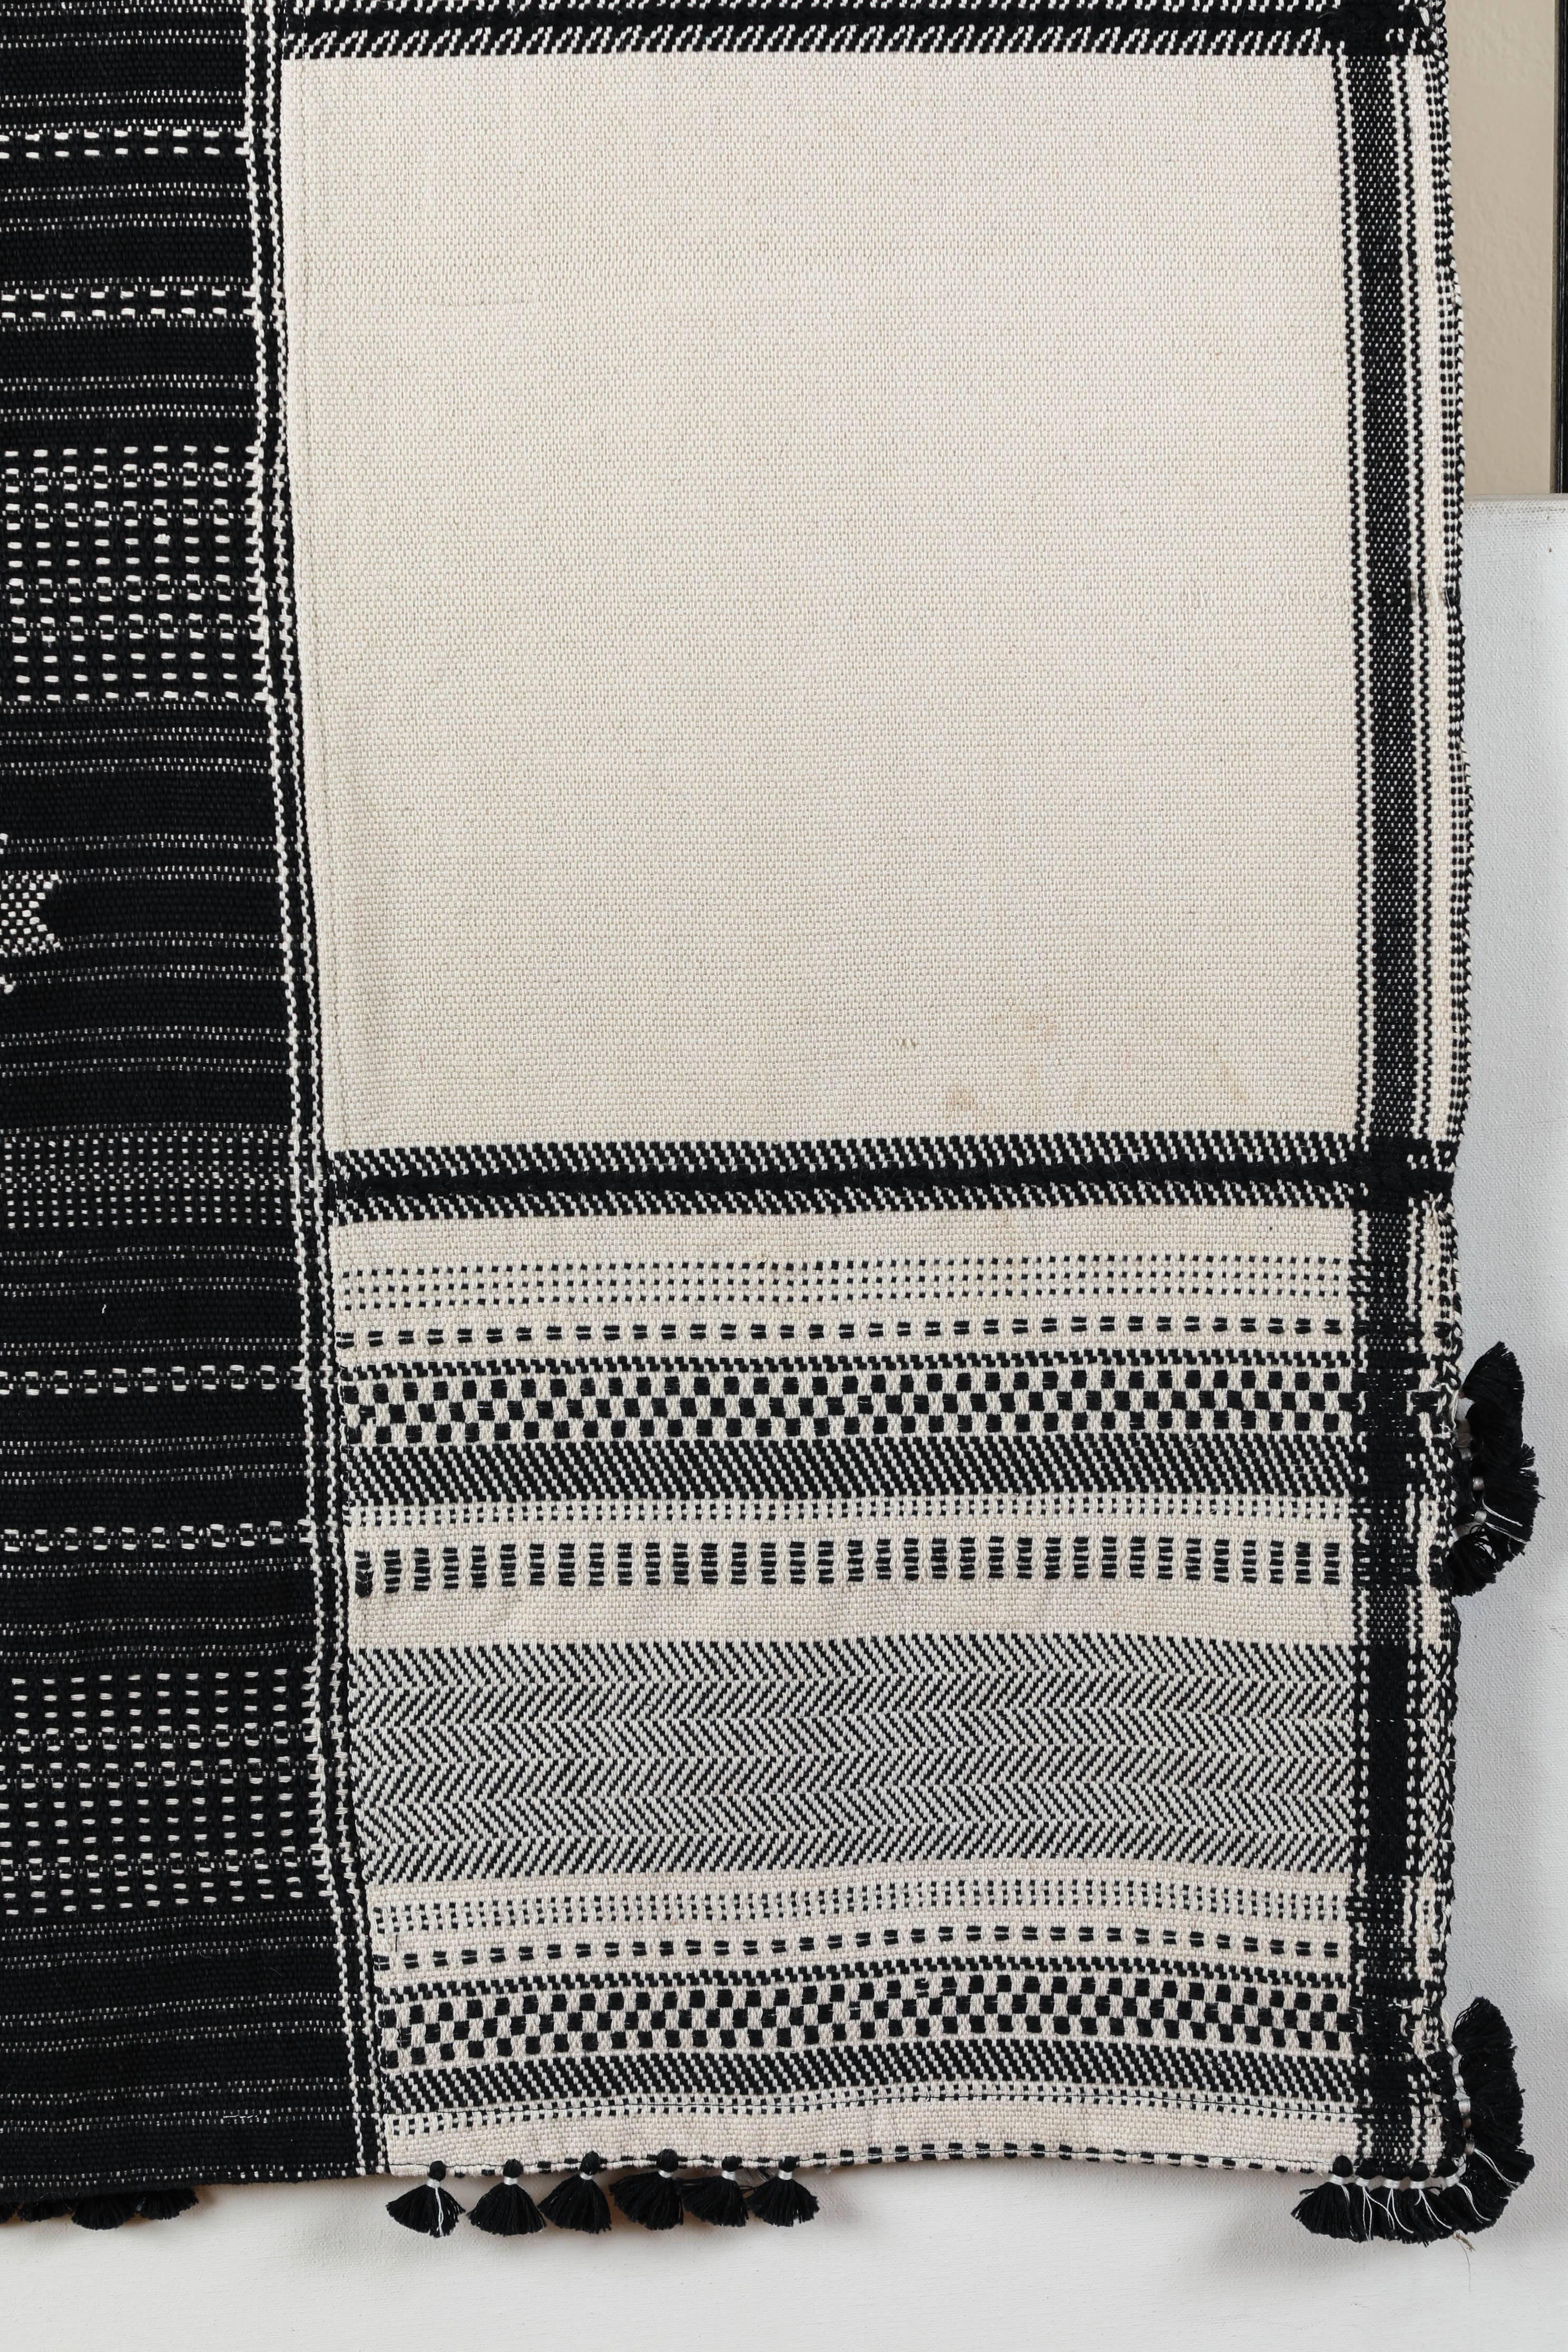 Kala naturally dyed organic cotton from Gujarat, India. Hand-loomed using traditional Indian textile techniques to produce extra weft woven stripes and plaids. This black and white bedcover has added hand-knotted tassels. Areas of hand embroidery